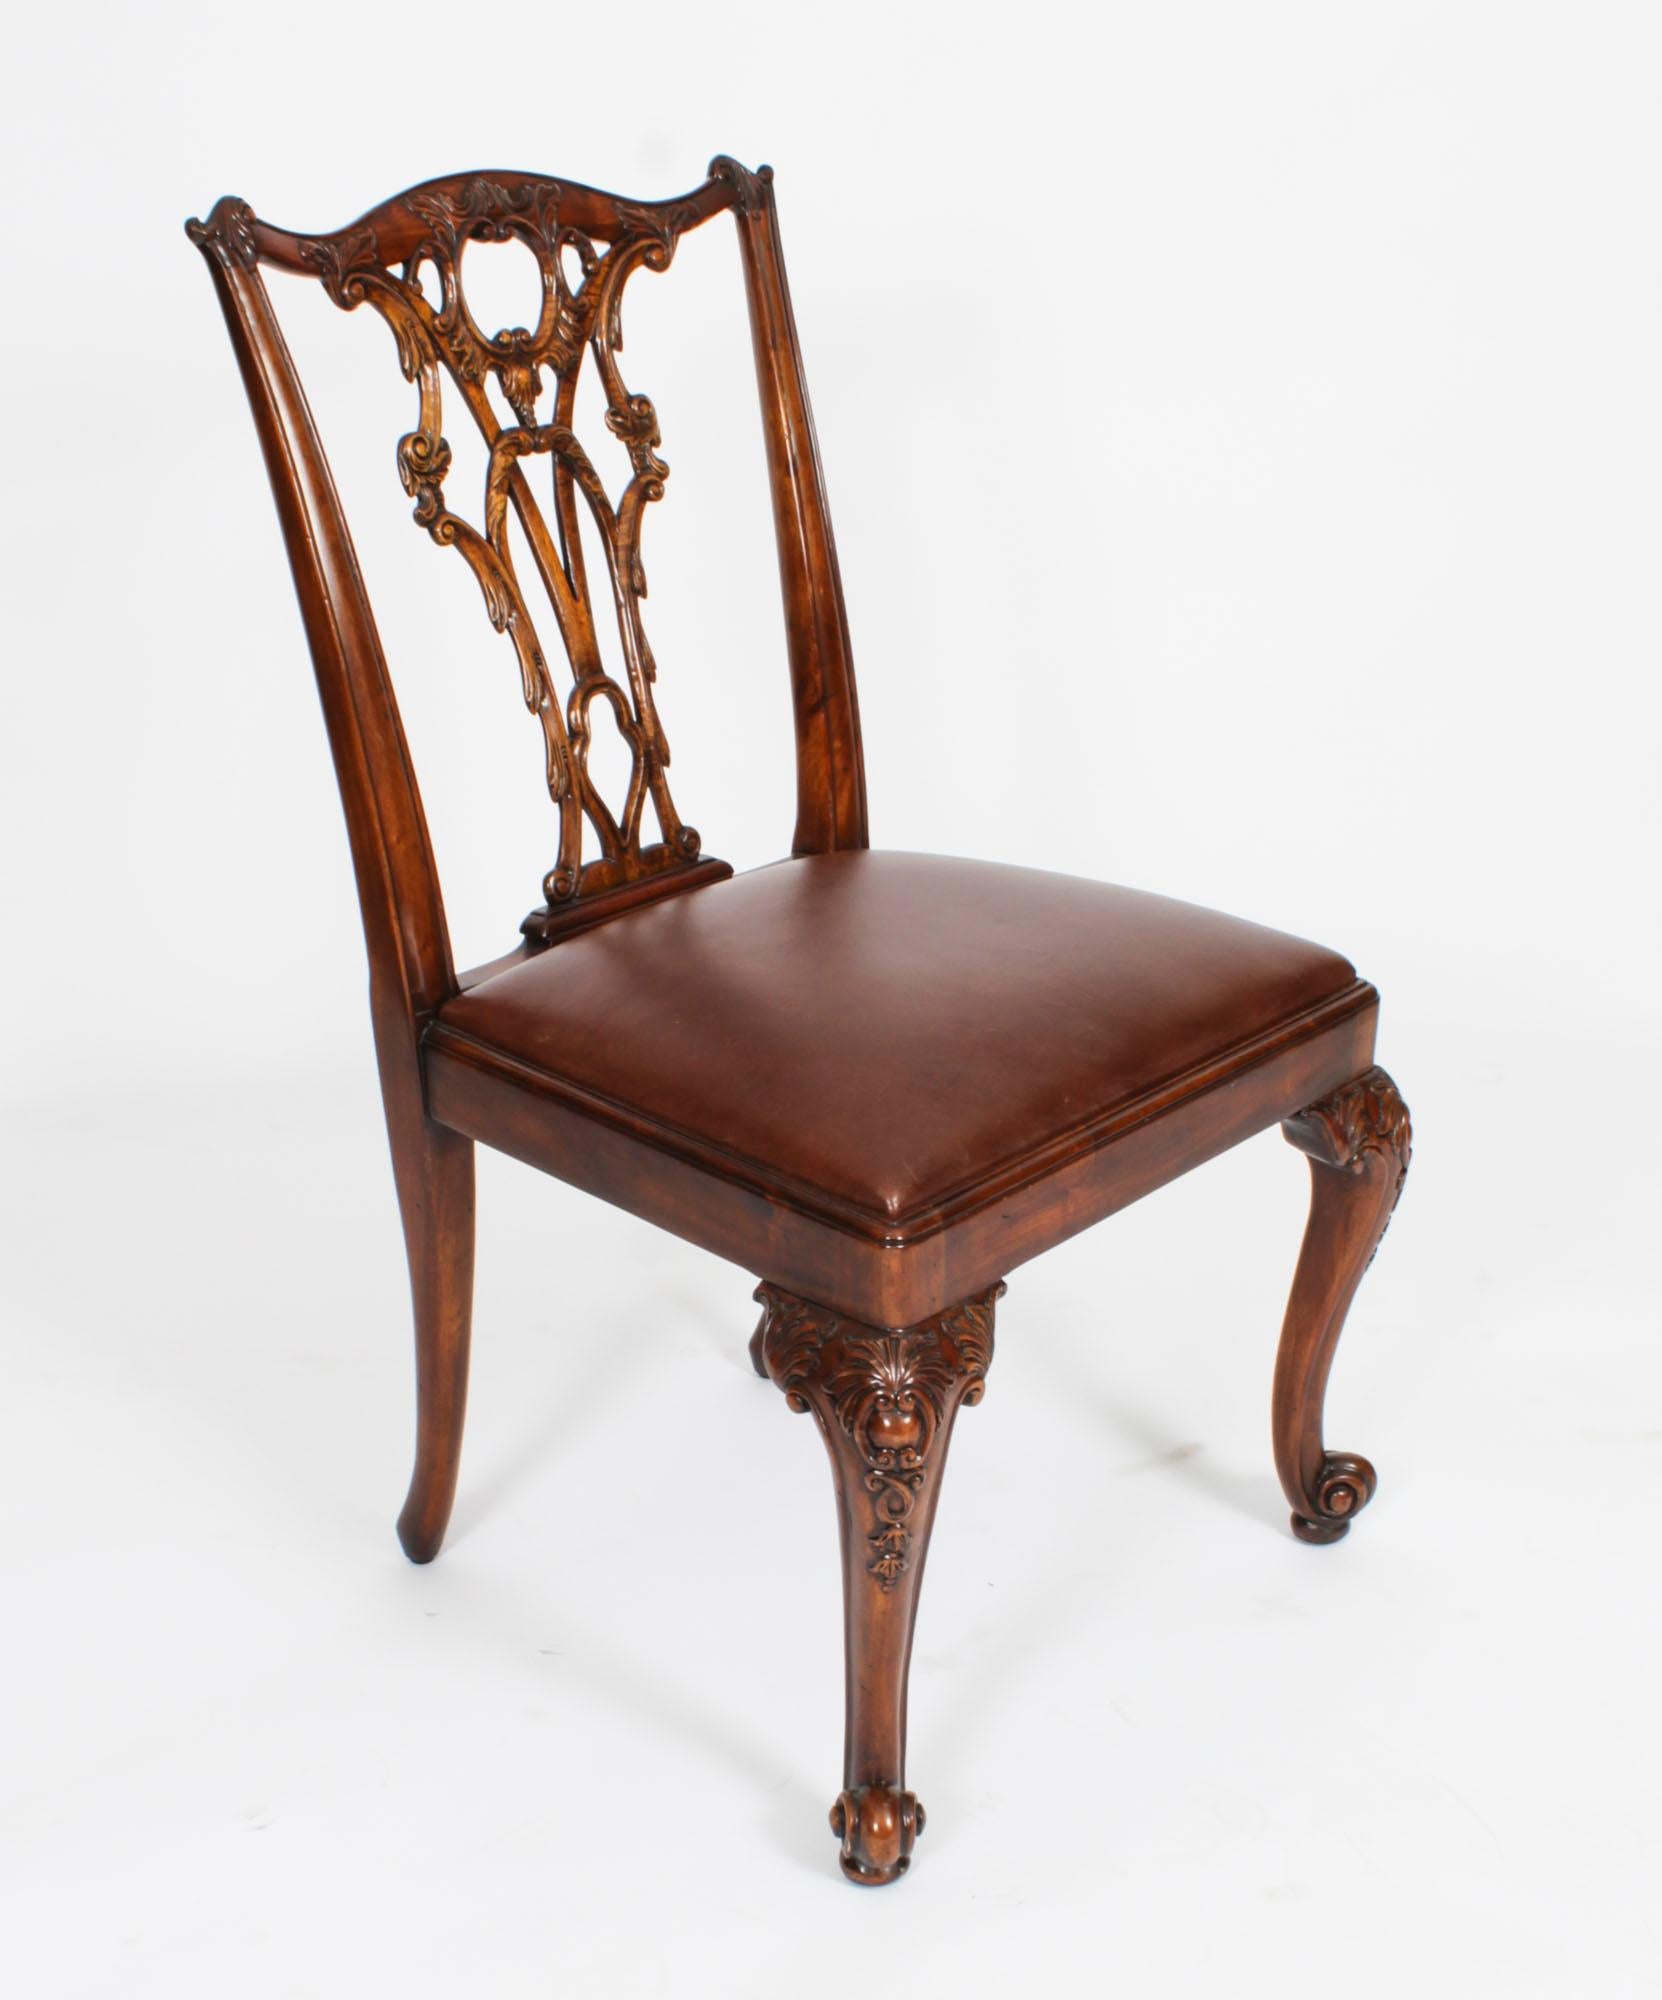 A beautiful Vintage set of twelve solid mahogany Chippendale Revival dining chairs, comprising ten sidechairs and two armchairs, dating from the mid 20th century.

They have been crafted from hand carved solid flame mahogany with drop in seats